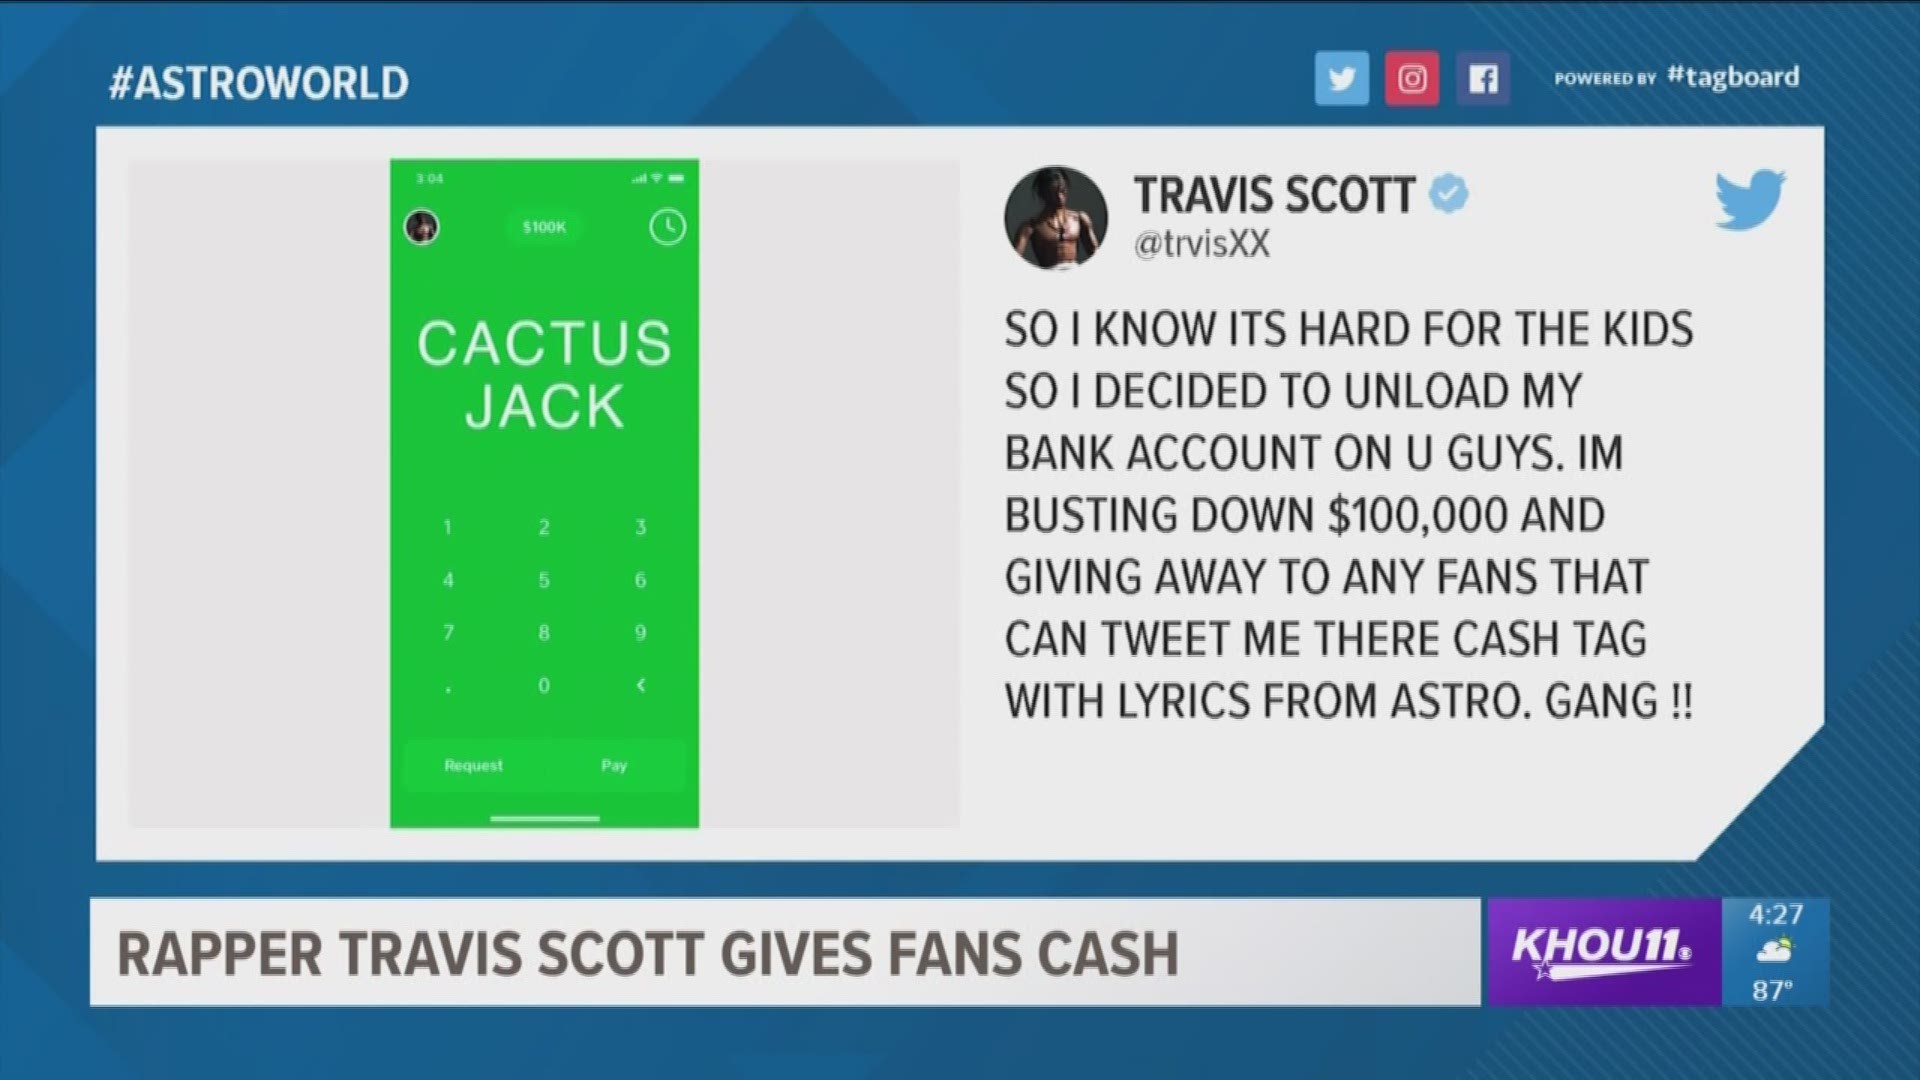 Houston rapper Travis Scott is in the giving spirit - Tuesday afternoon he announced on his Twitter that he is breaking down $100,000 and giving money to fans that tweet him their cash app tag with lyrics from his latest album ?Astroworld.?